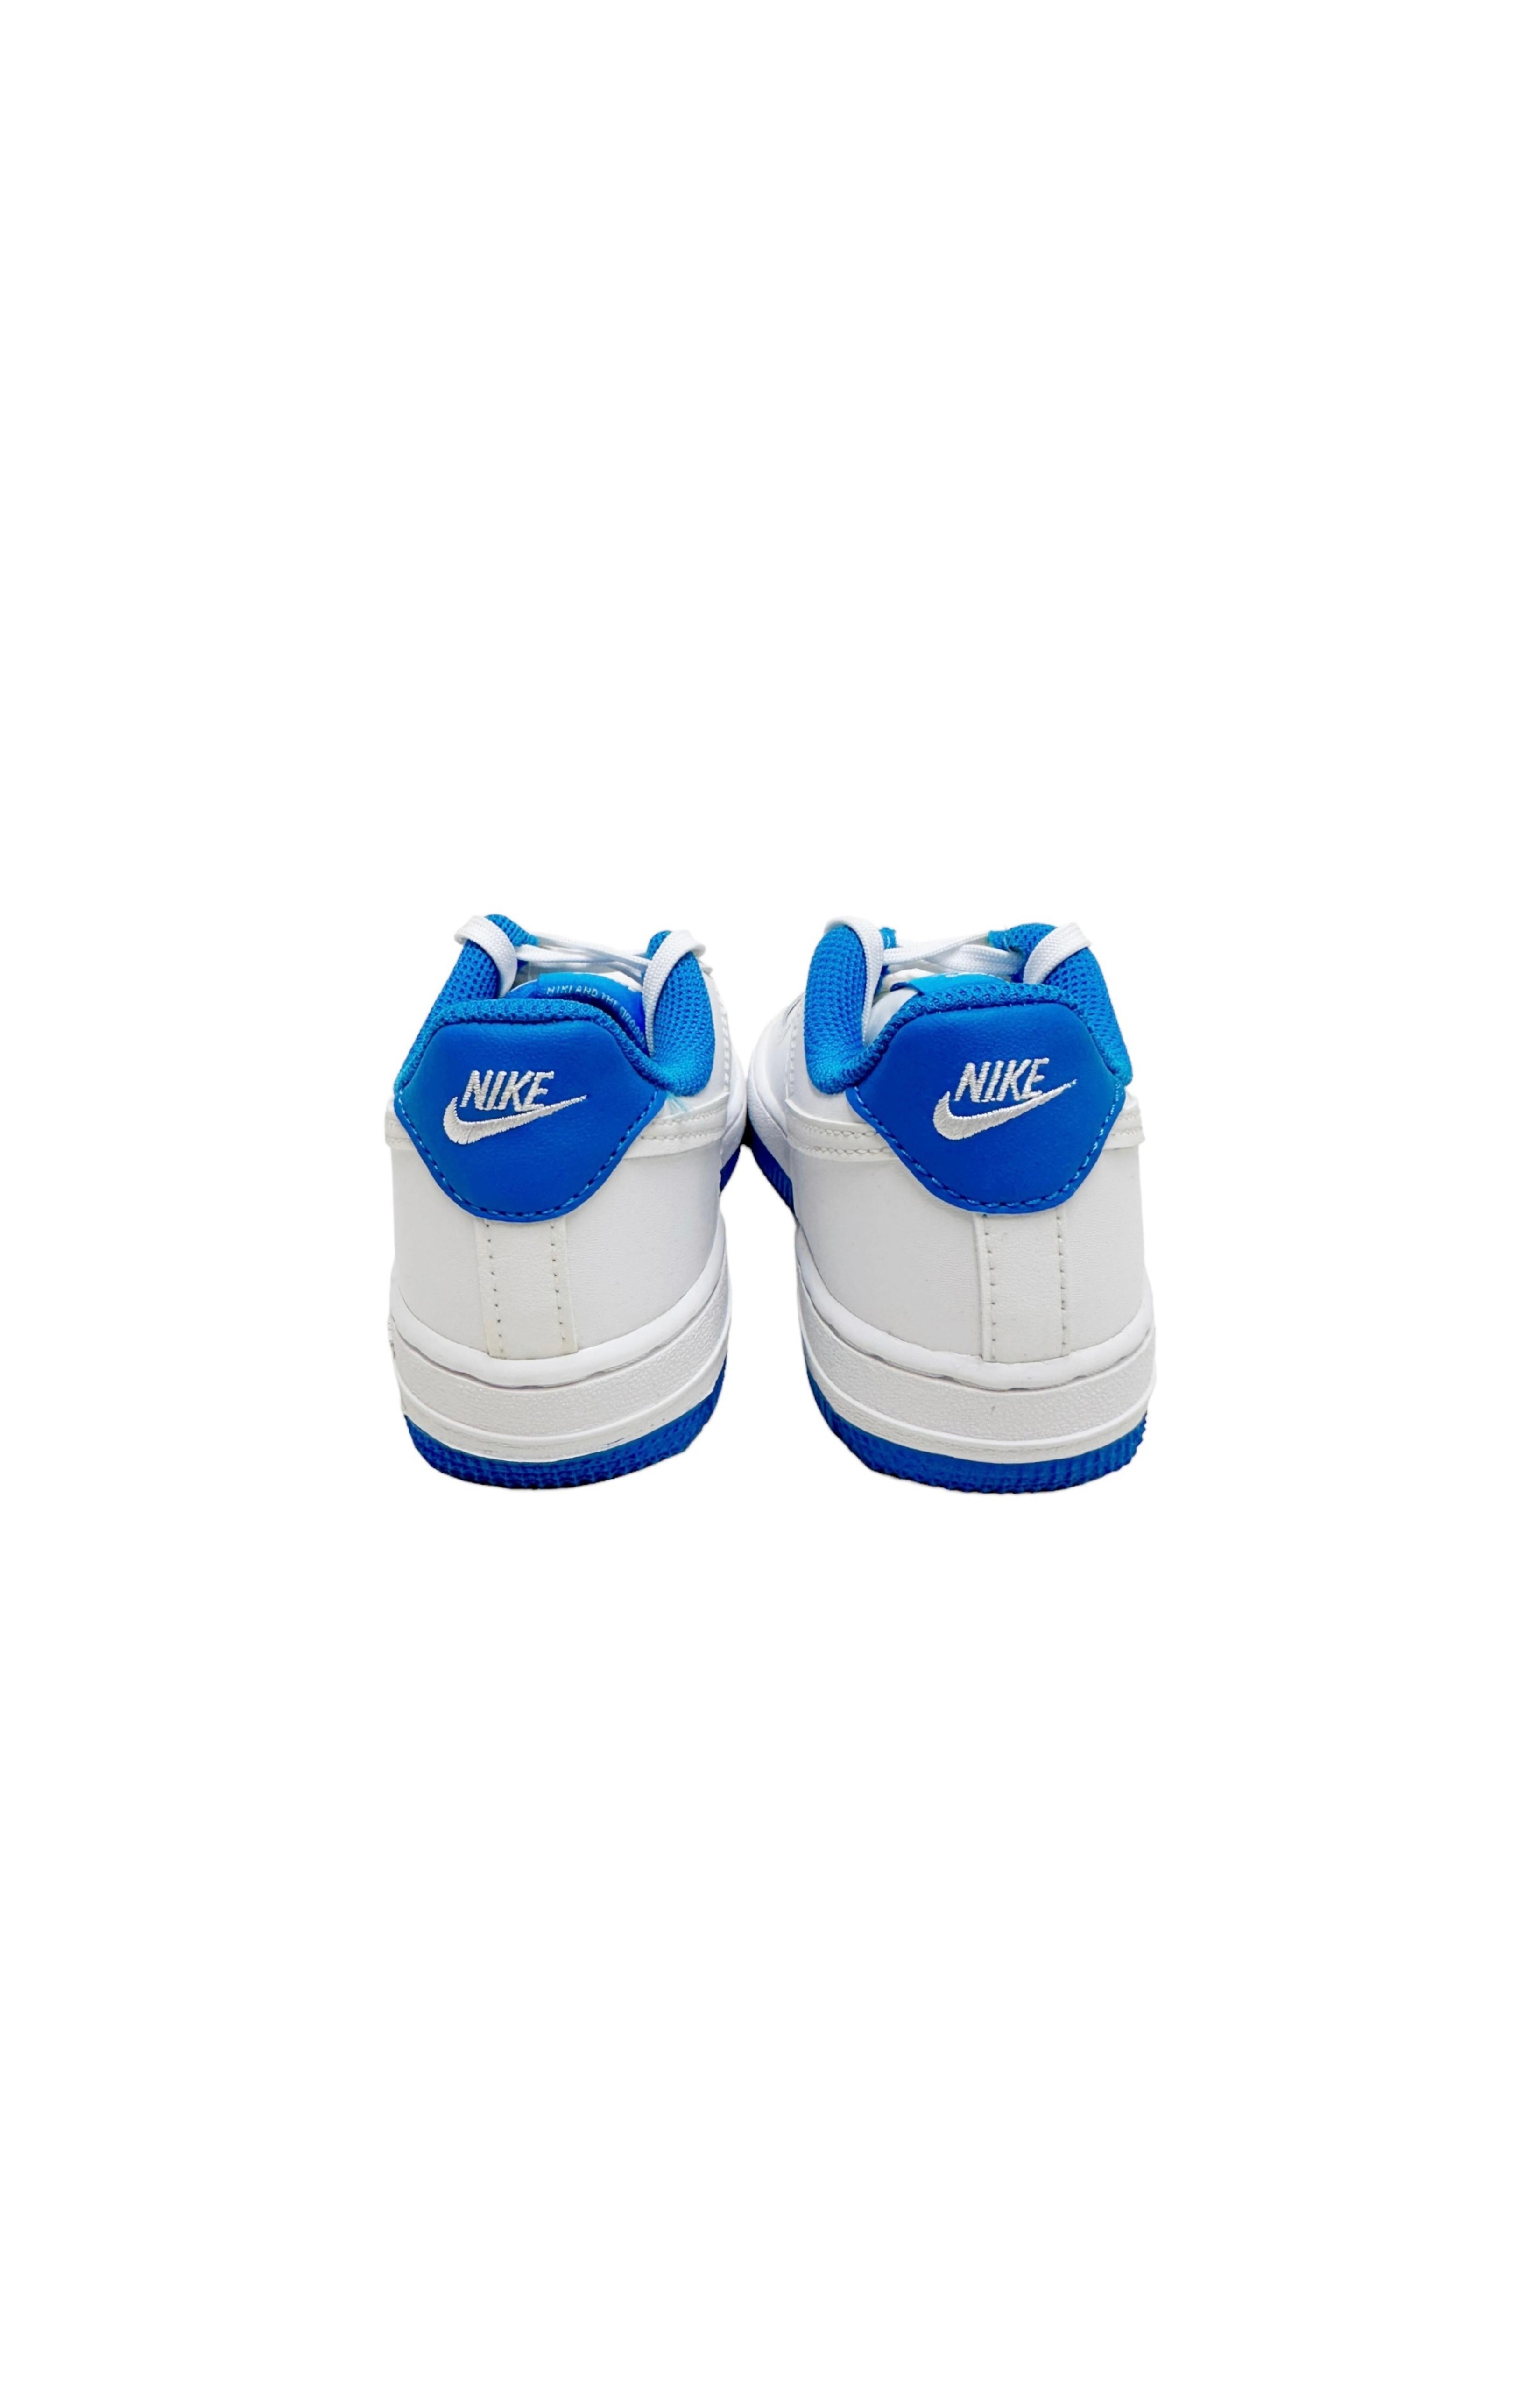 NIKE (NEW) Sneakers Size: Toddler US 11C